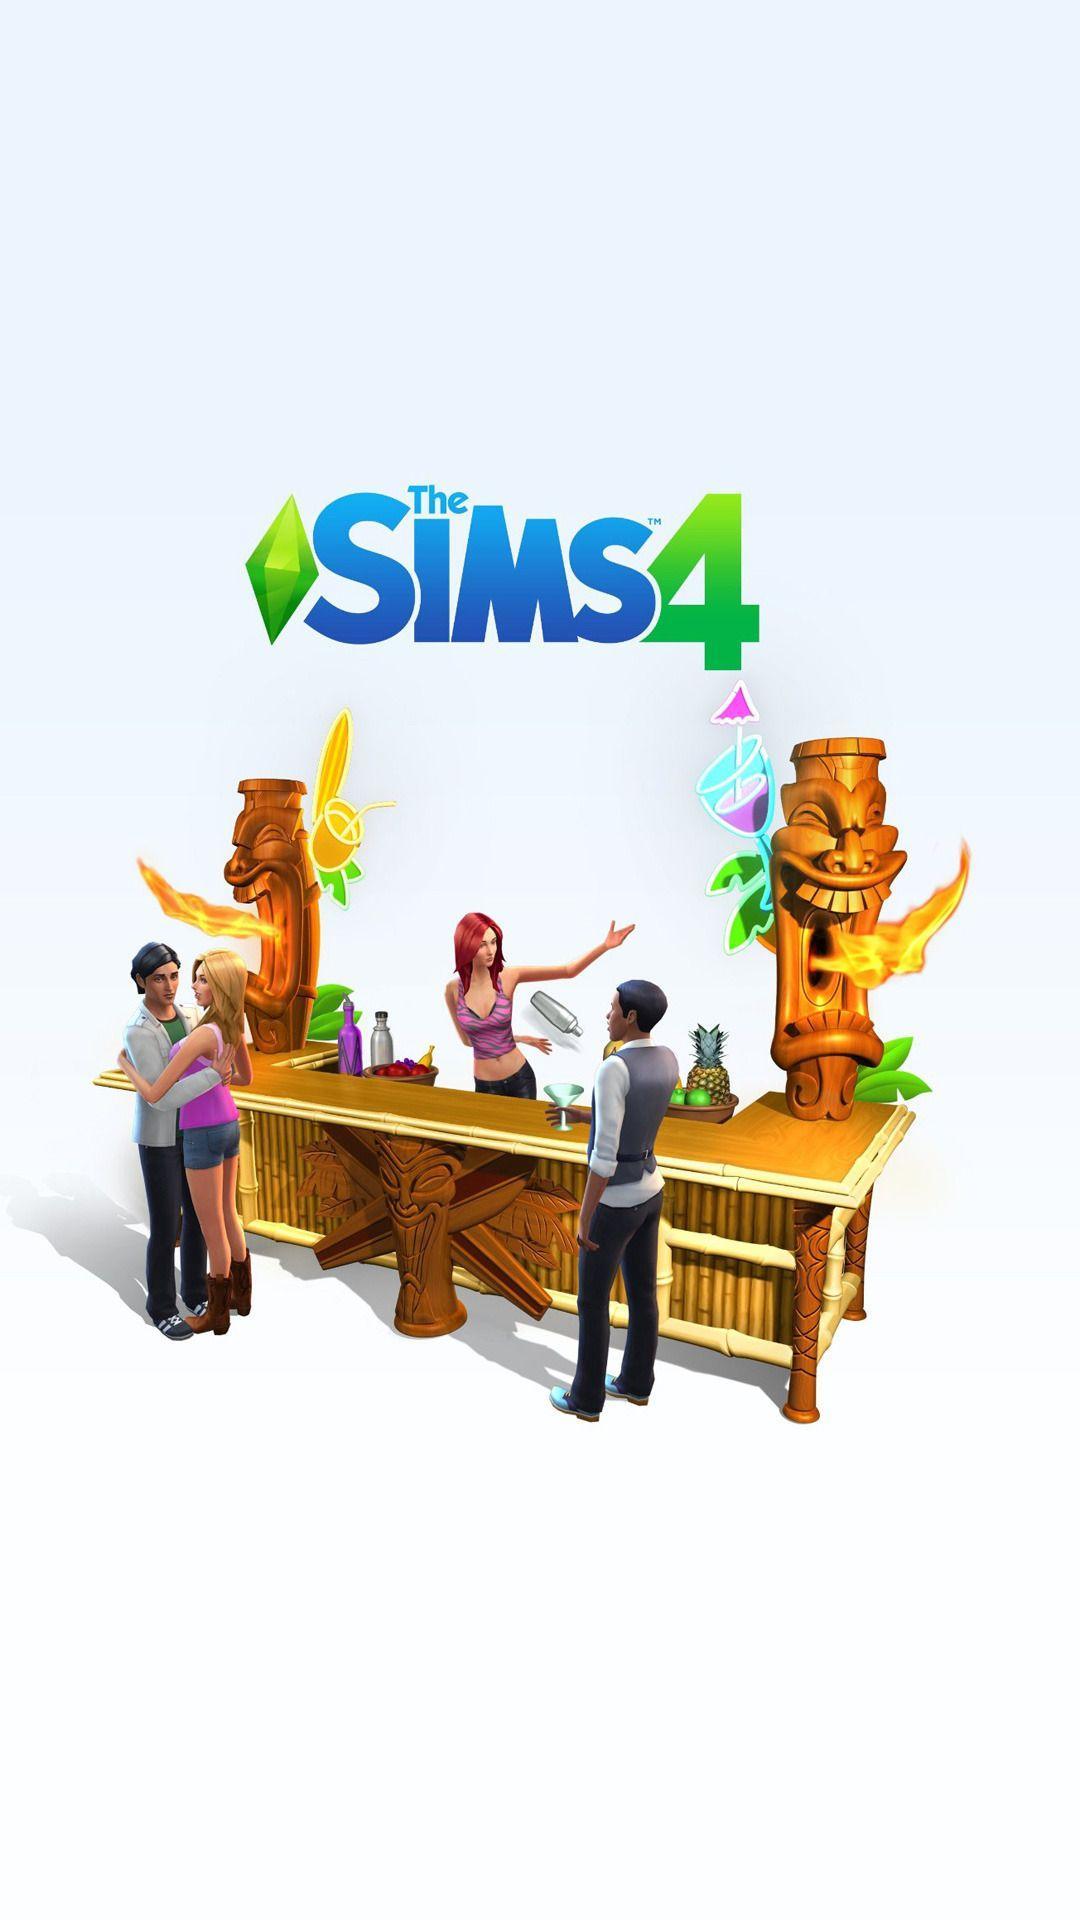 The Sims 4 Mobile Wallpaper 3296